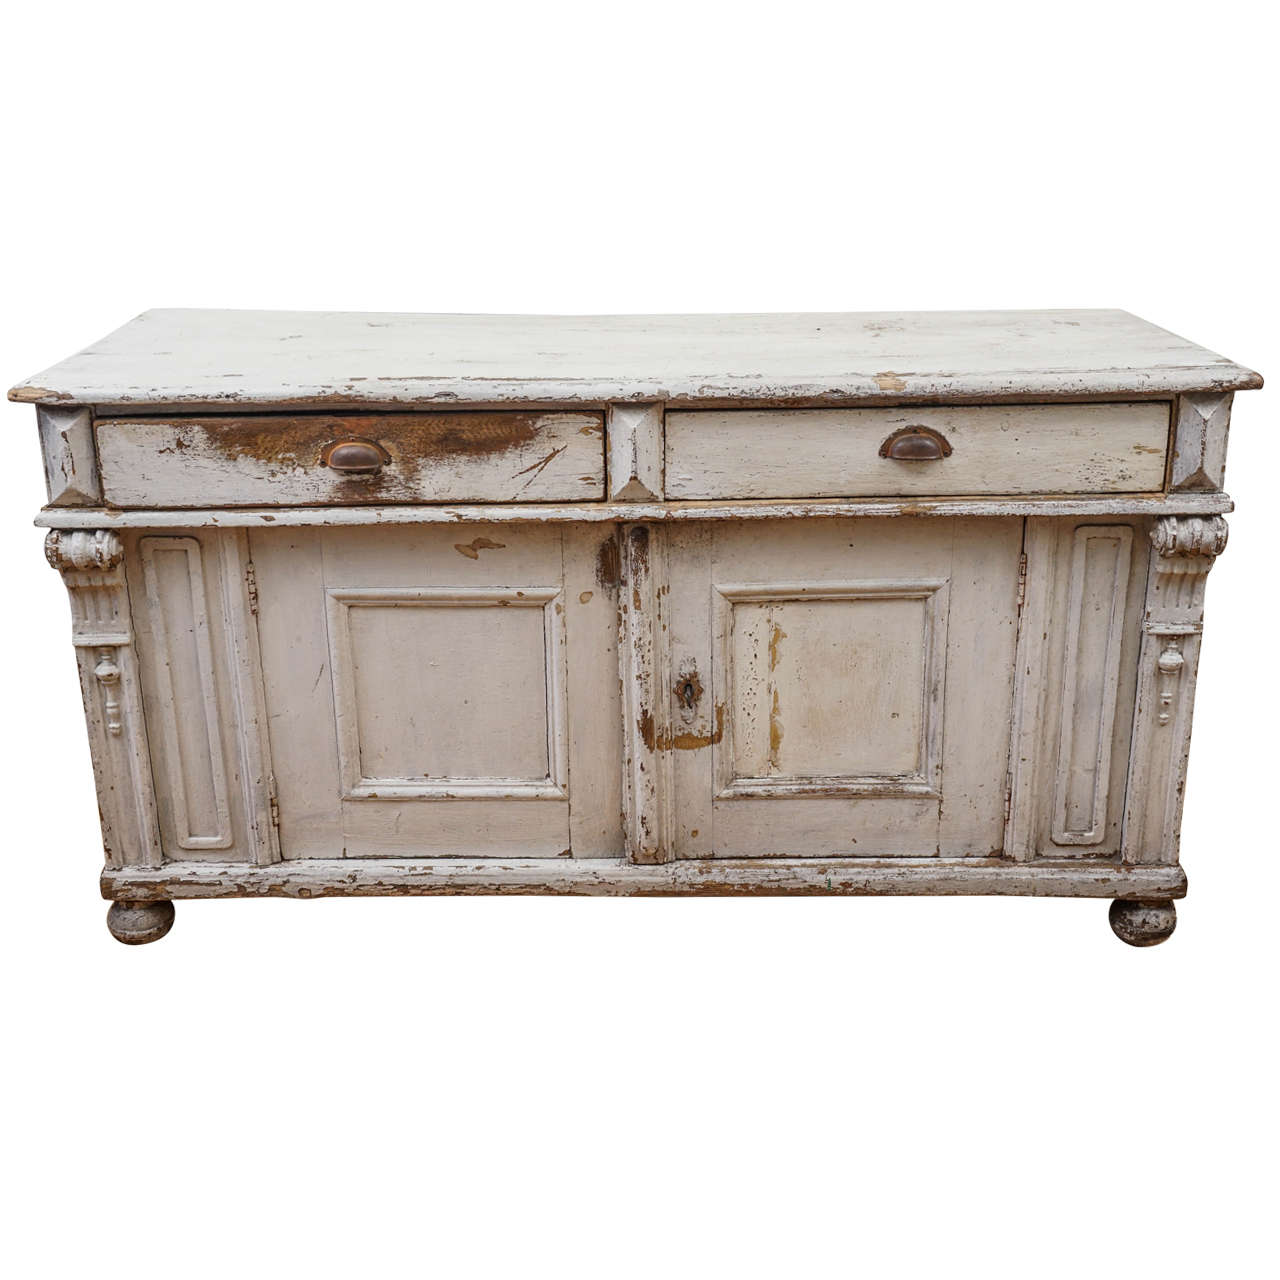 Two-Door and Two-Drawer Painted Sideboard